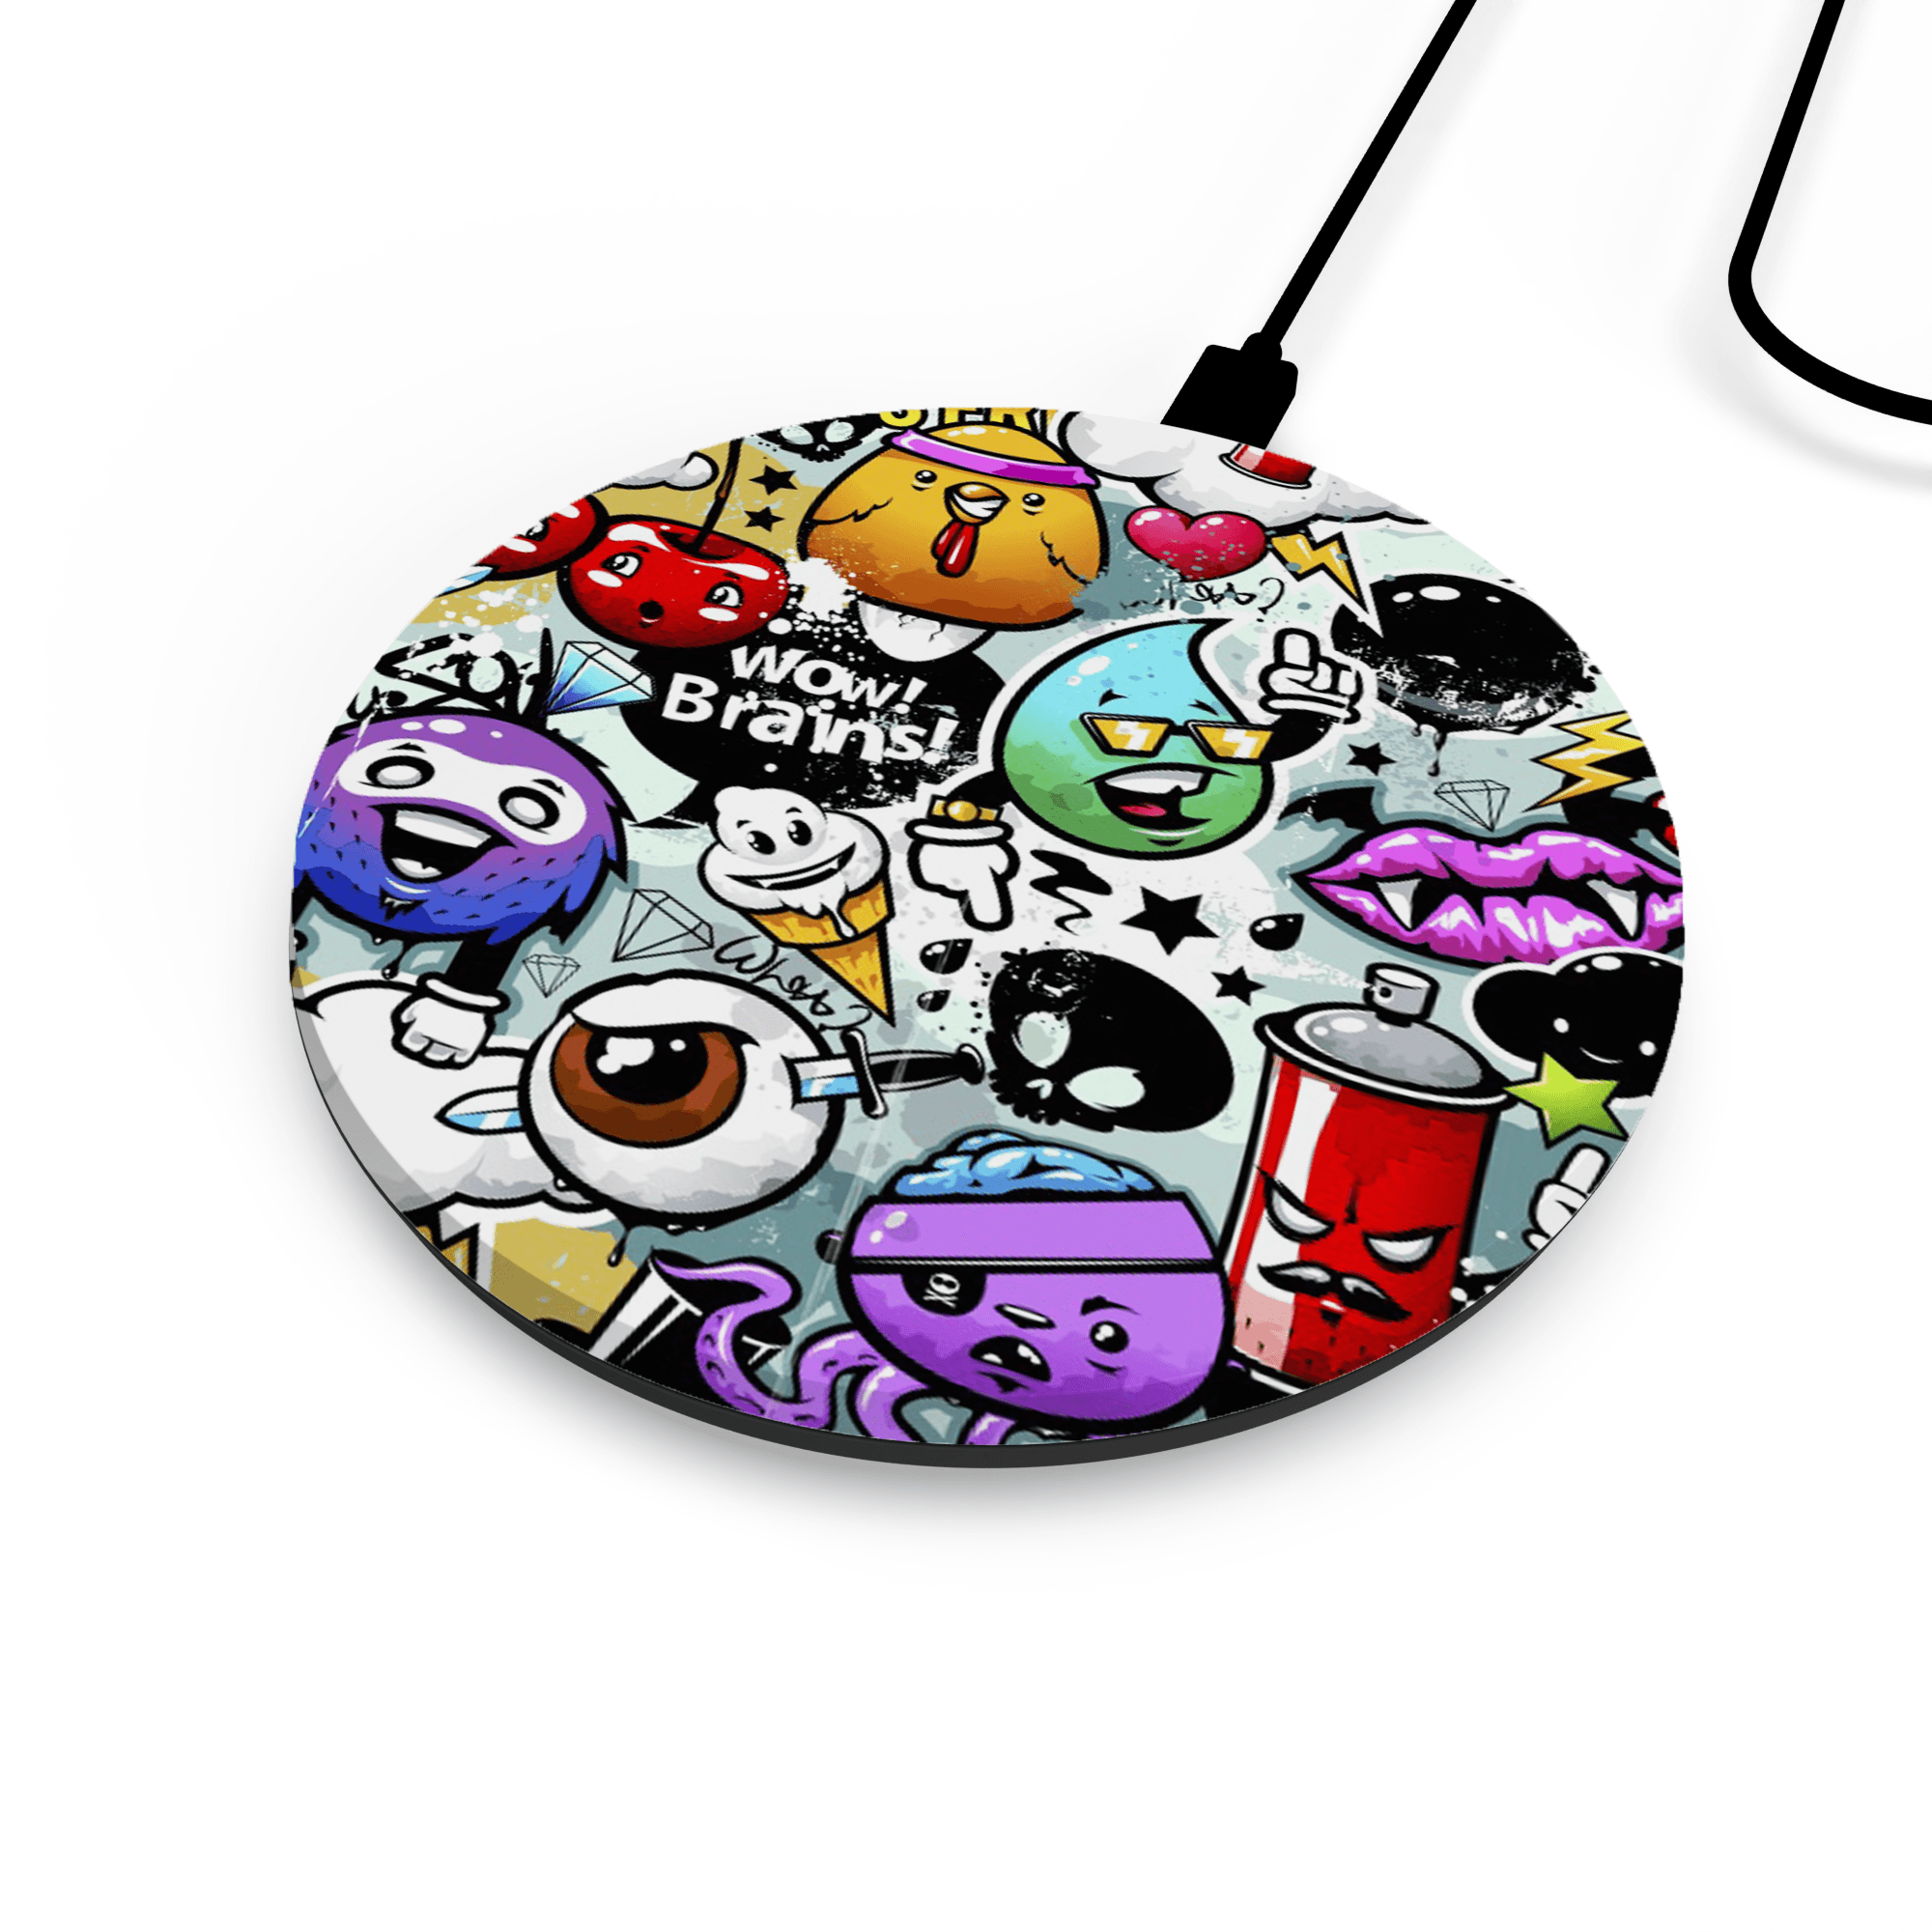 WIRELESS CHARGER - WOW BRAINS - Just in Case